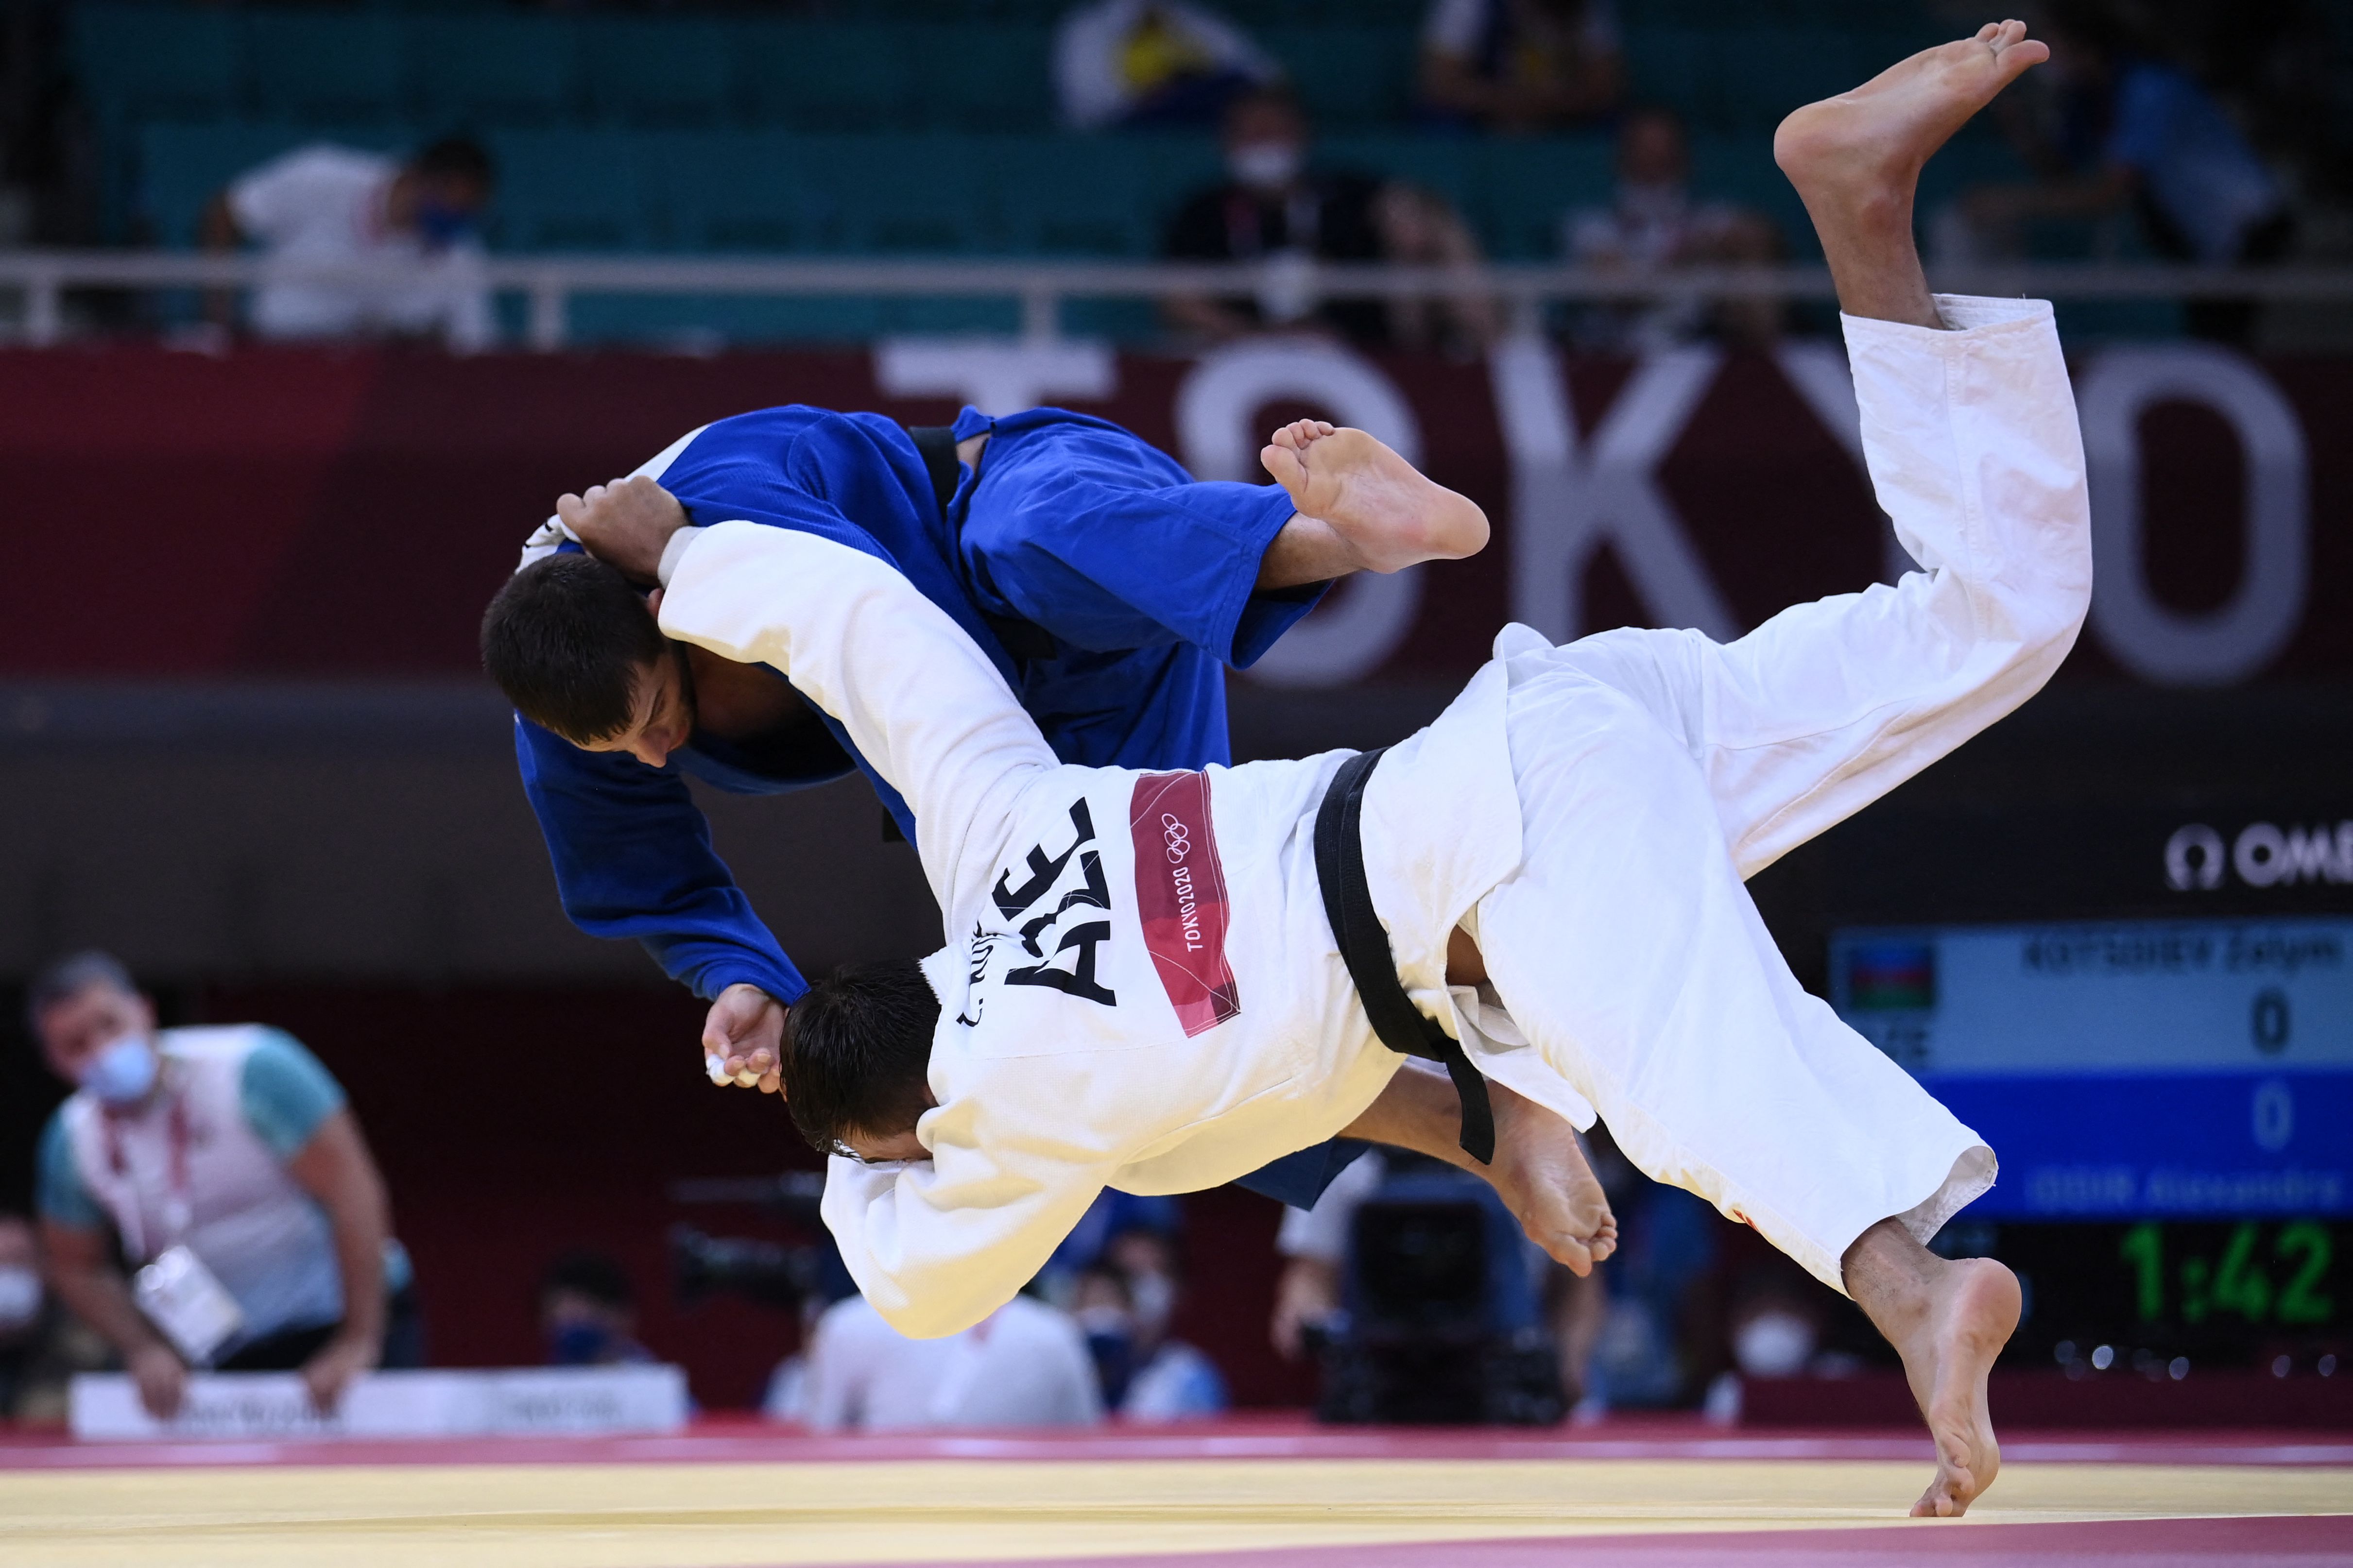 Azerbaijan's Zelym Kotsoiev (white) and France's Alexandre Iddir compete in the judo men's -100kg elimination round during the Tokyo 2020 Olympic Games on July 29